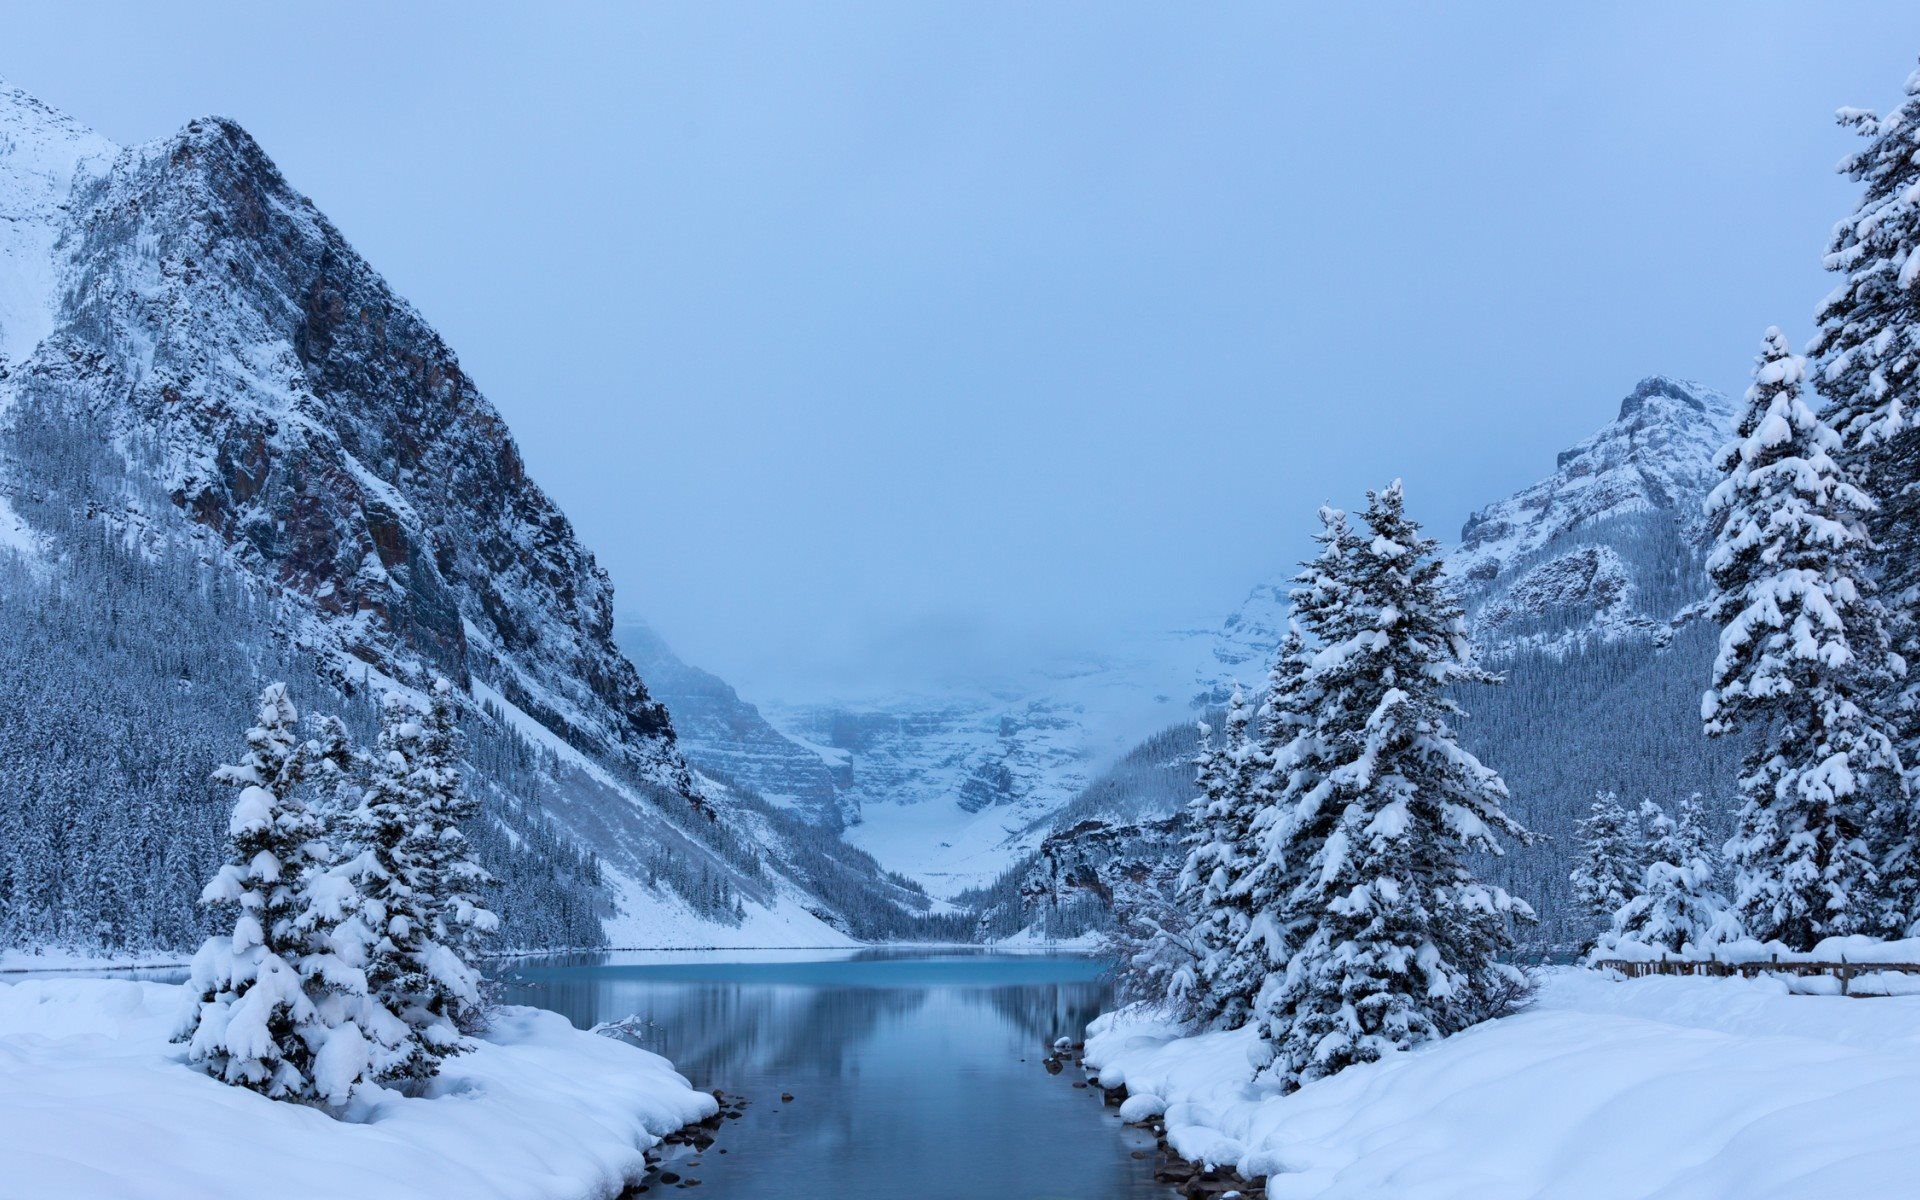 Download wallpaper forest, snow, mountains, winter, lake louise